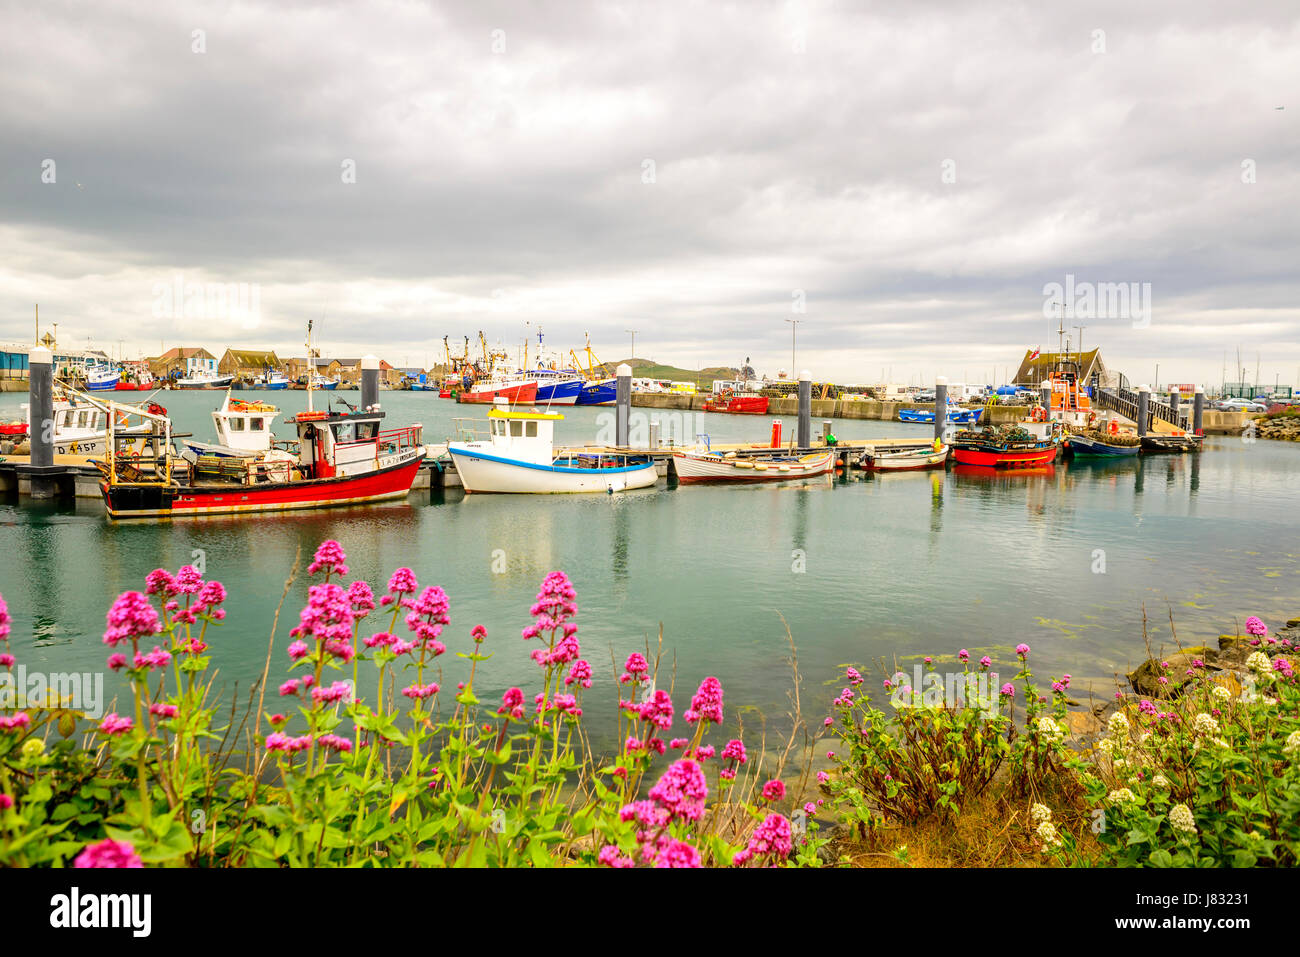 View of Howth Harbour with colorful boats in the foreground Stock Photo